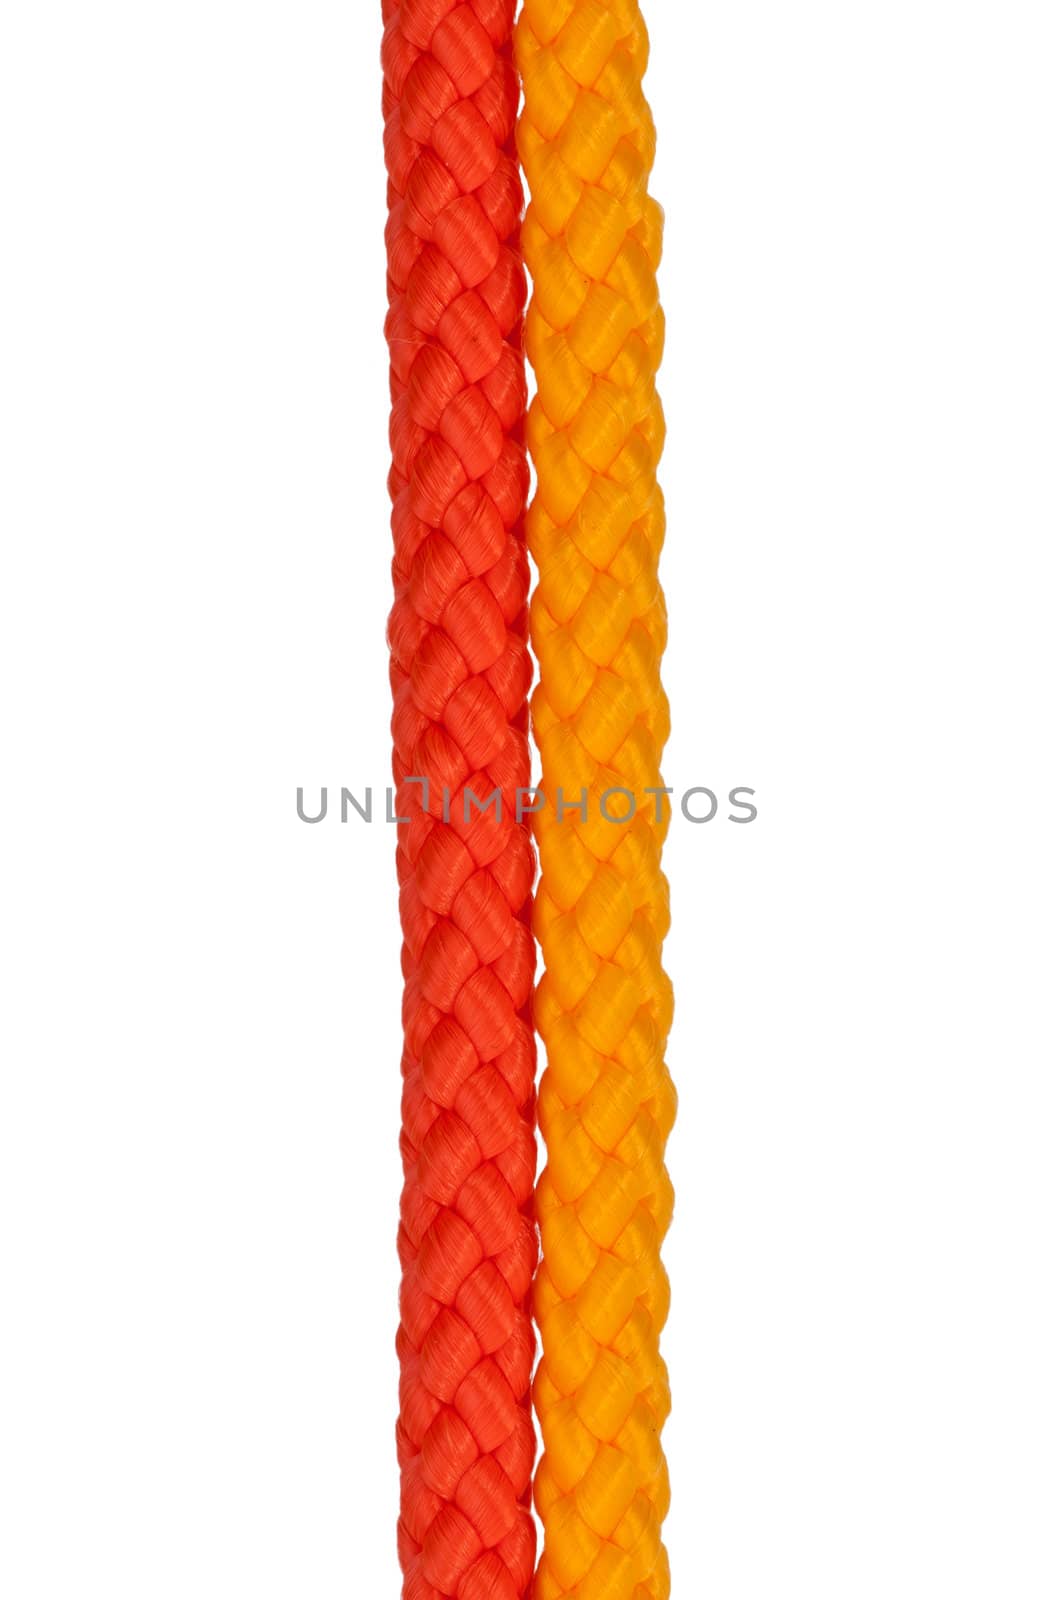 strong knot tied by a rope isolated on a white background